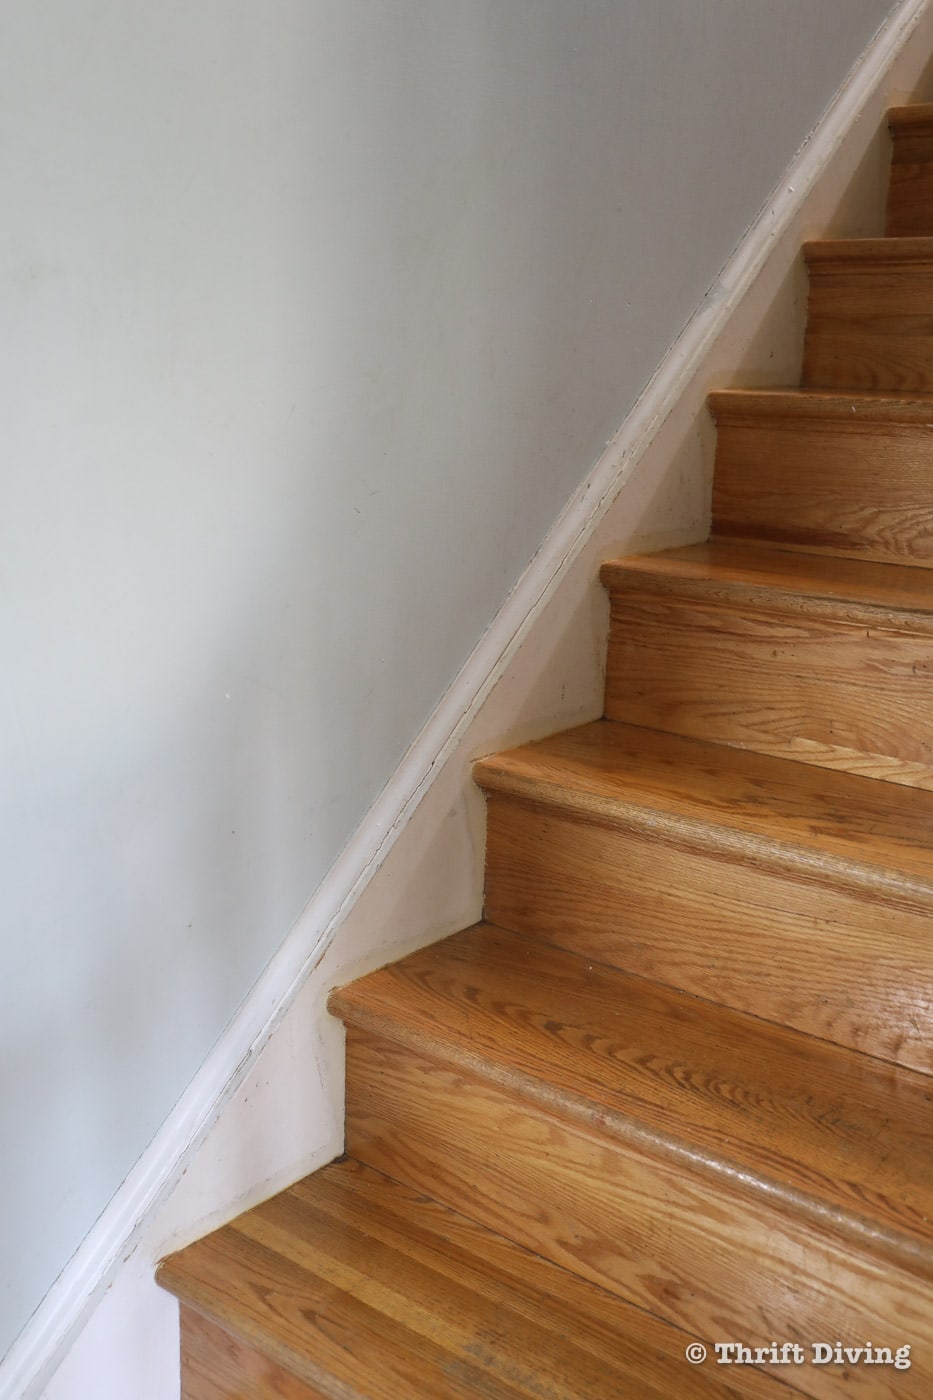 Worn oak stairs need to be refinished, but sanding and restaining stairs is a big job. Try painting the stairs and install a stair runner. Here's how (includes VIDEO tutorial). - Thrift Diving